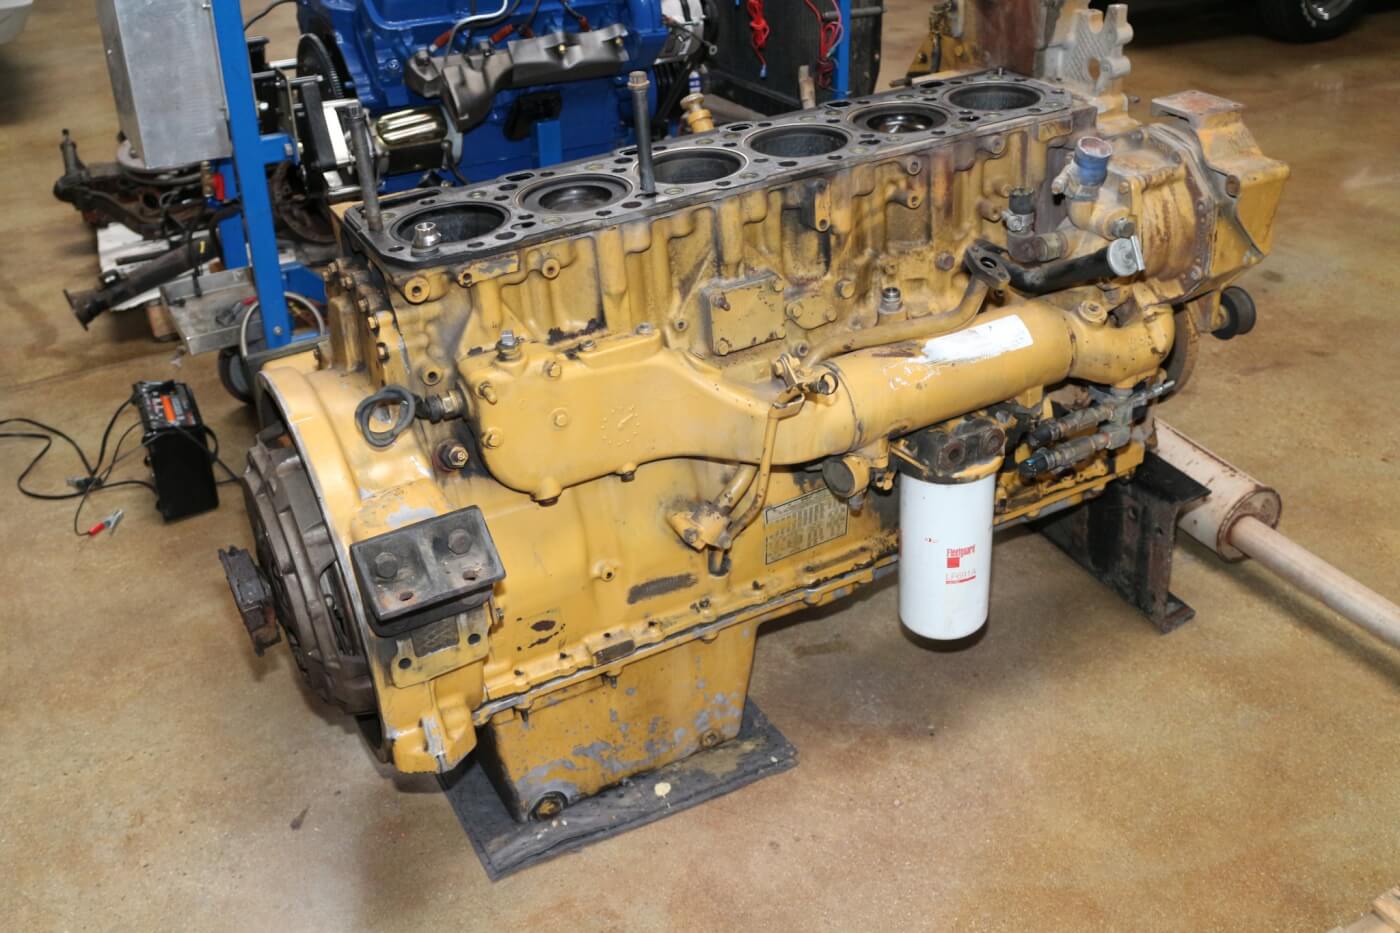 ARP is constantly developing new products. We found this Cat 16 engine in their R&D shop being used to engineer another line of diesel engine upgrade assembly hardware.